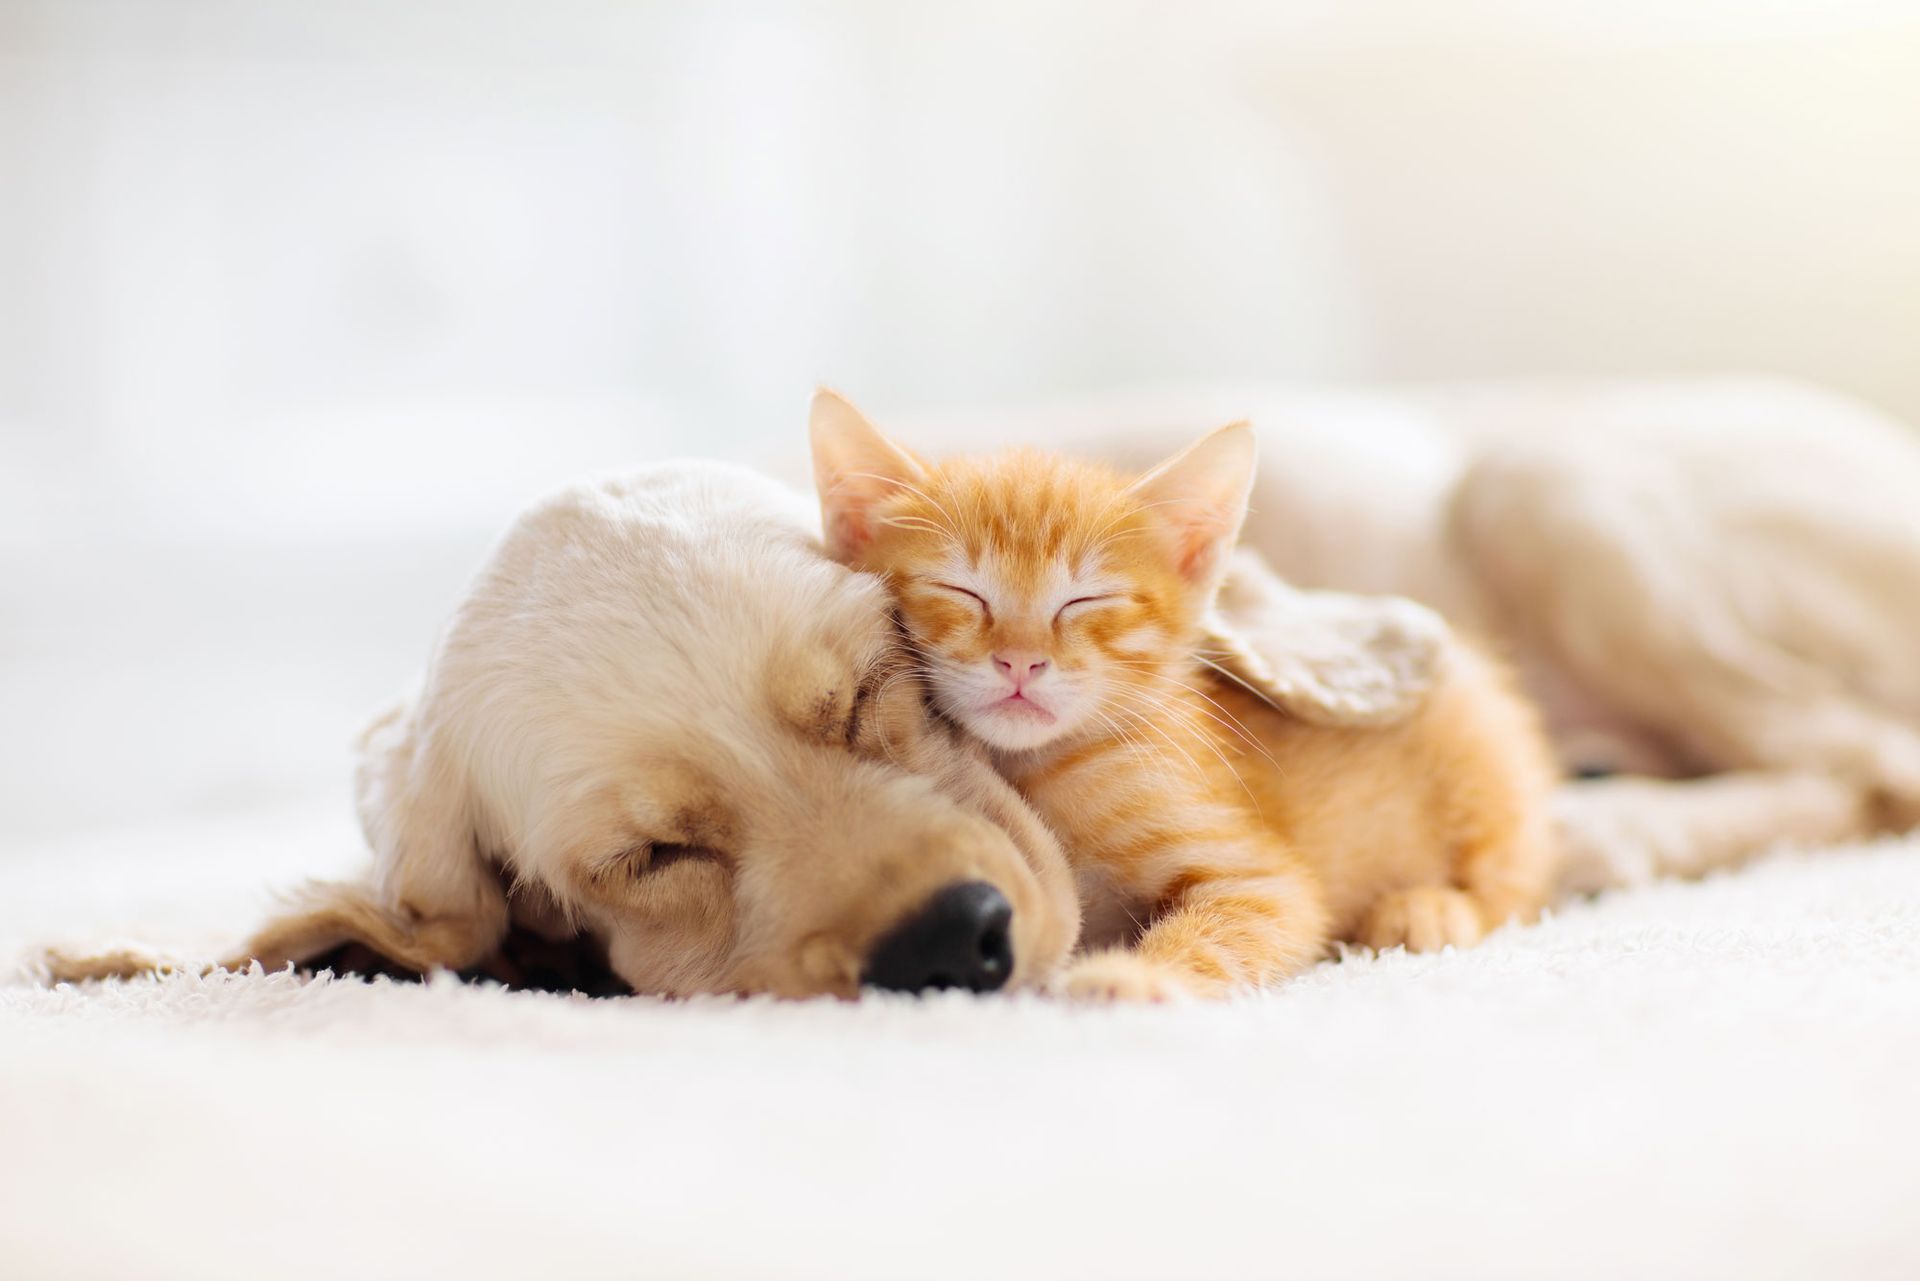 A dog and a kitten are sleeping next to each other on a bed.